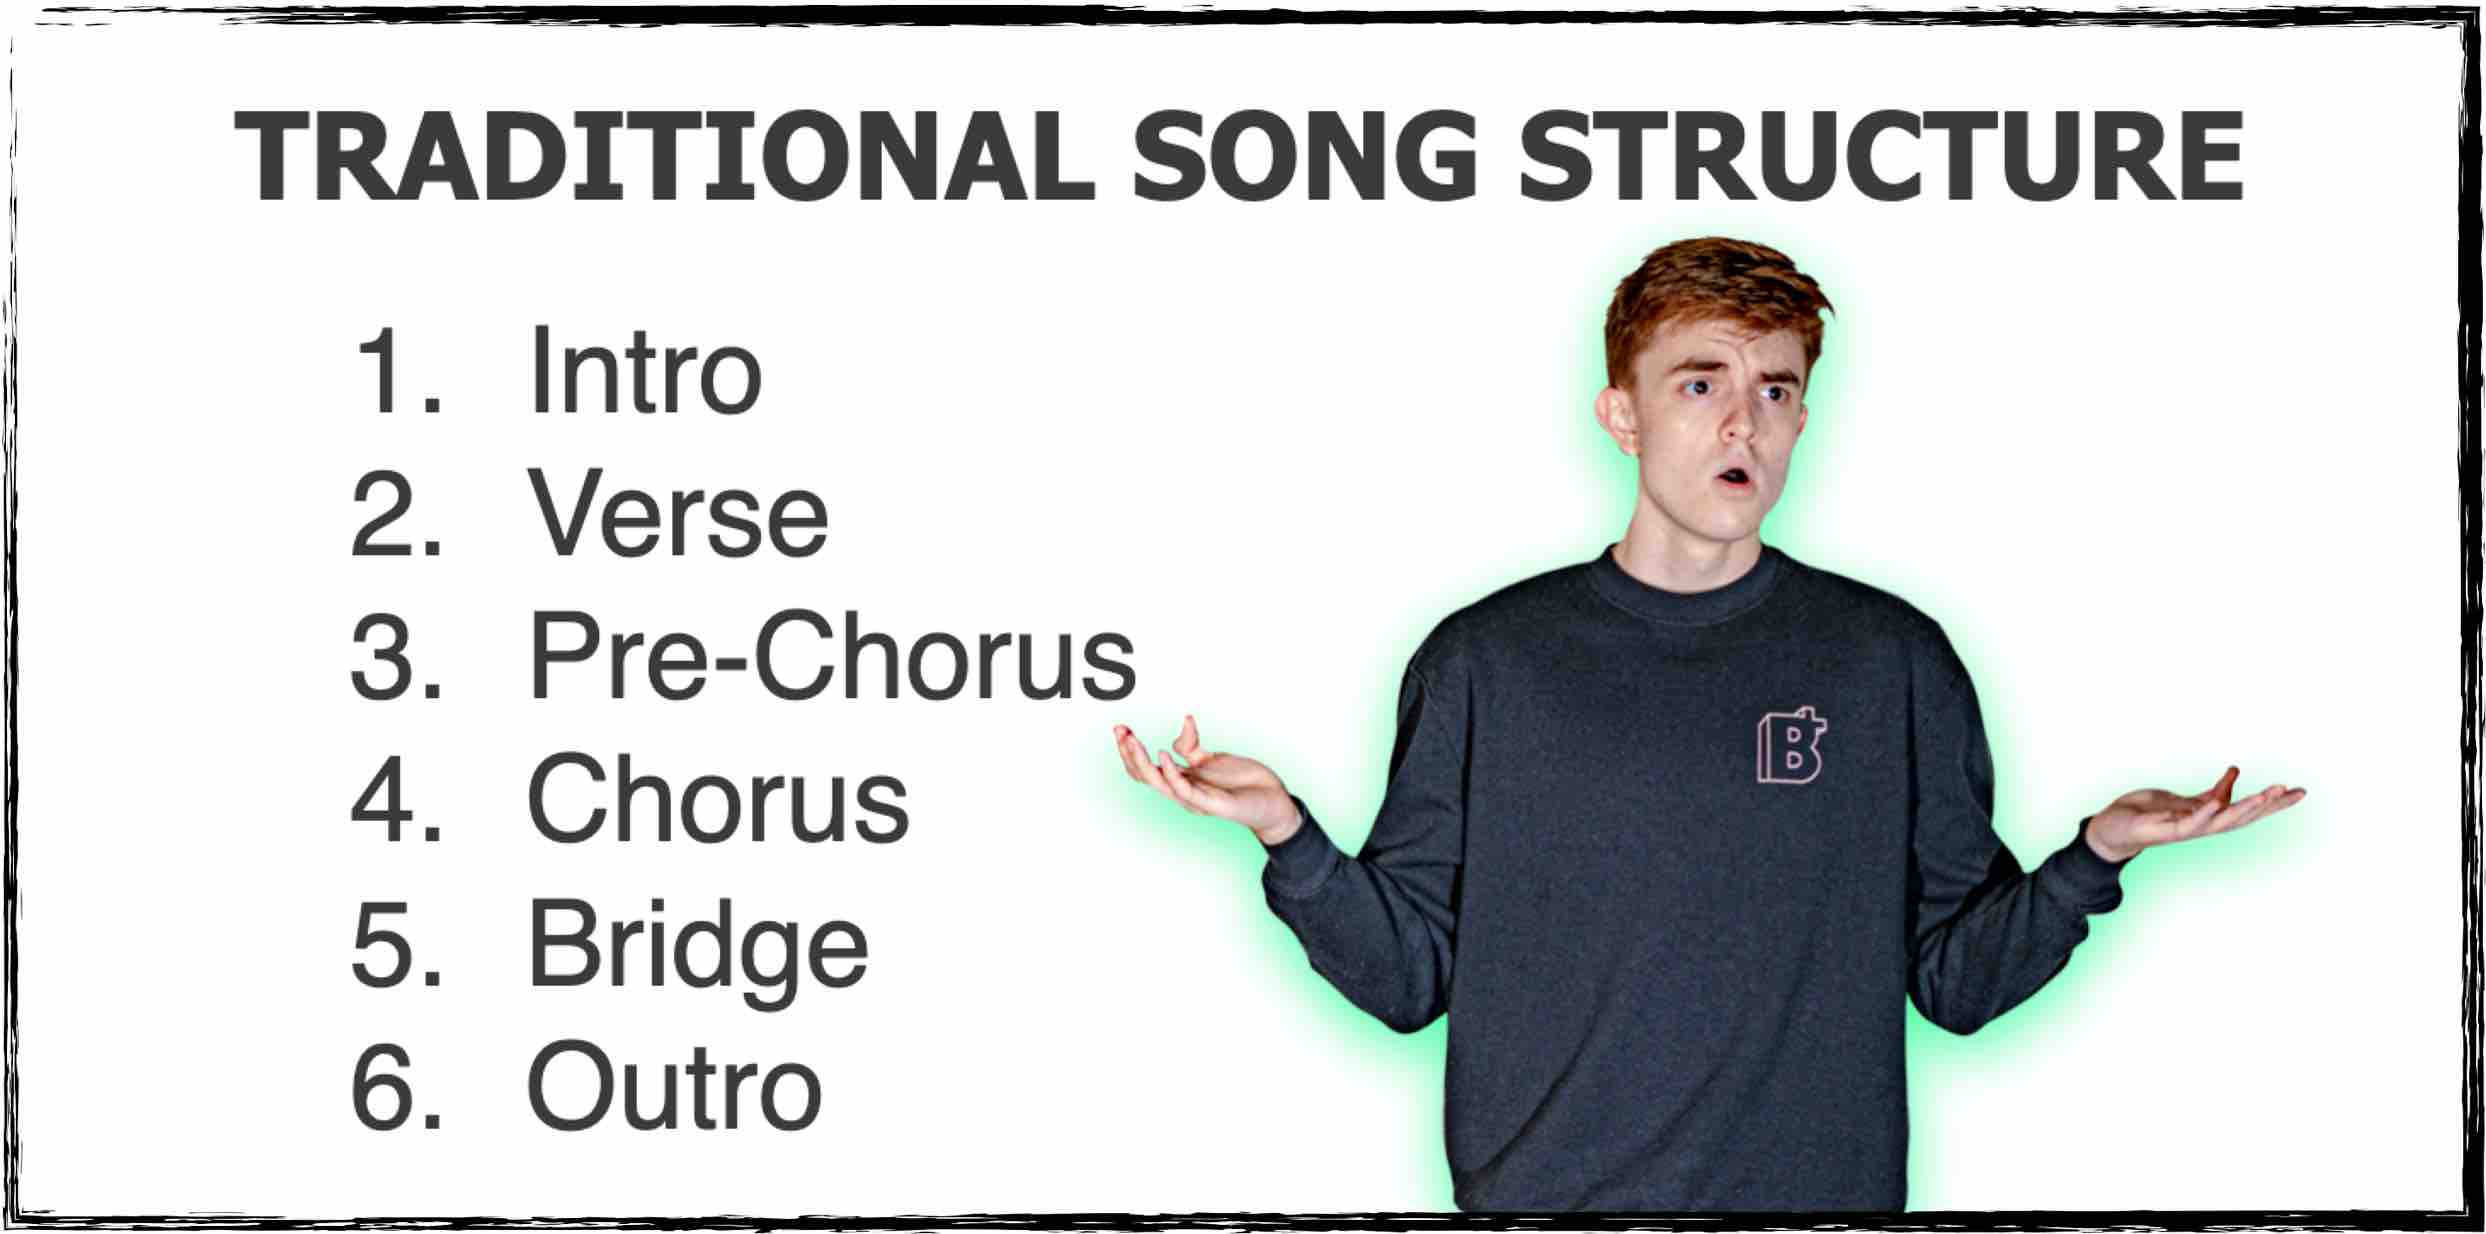 Traditional song structure